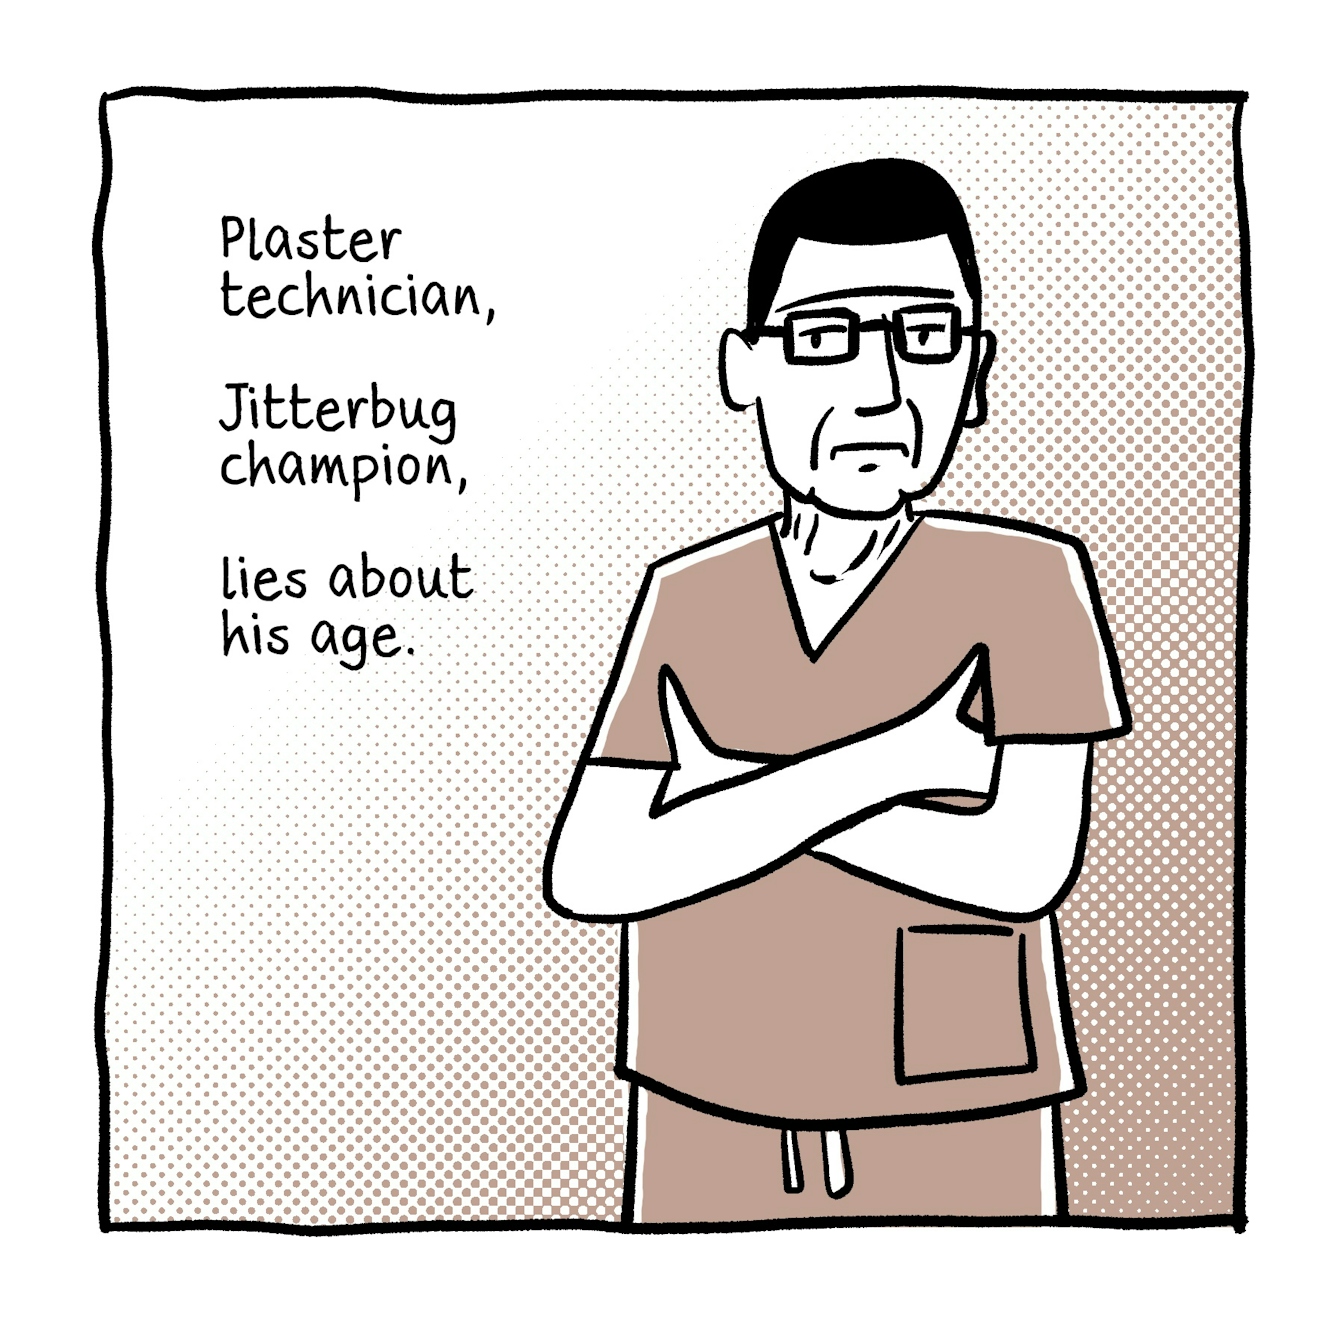 The second panel shows an older male doctor dressed in scrubs standing with his arms folded, looking seriously out at the viewer. The text next to him reads, "Plaster technician... Jitterbug champion... lies about his age."